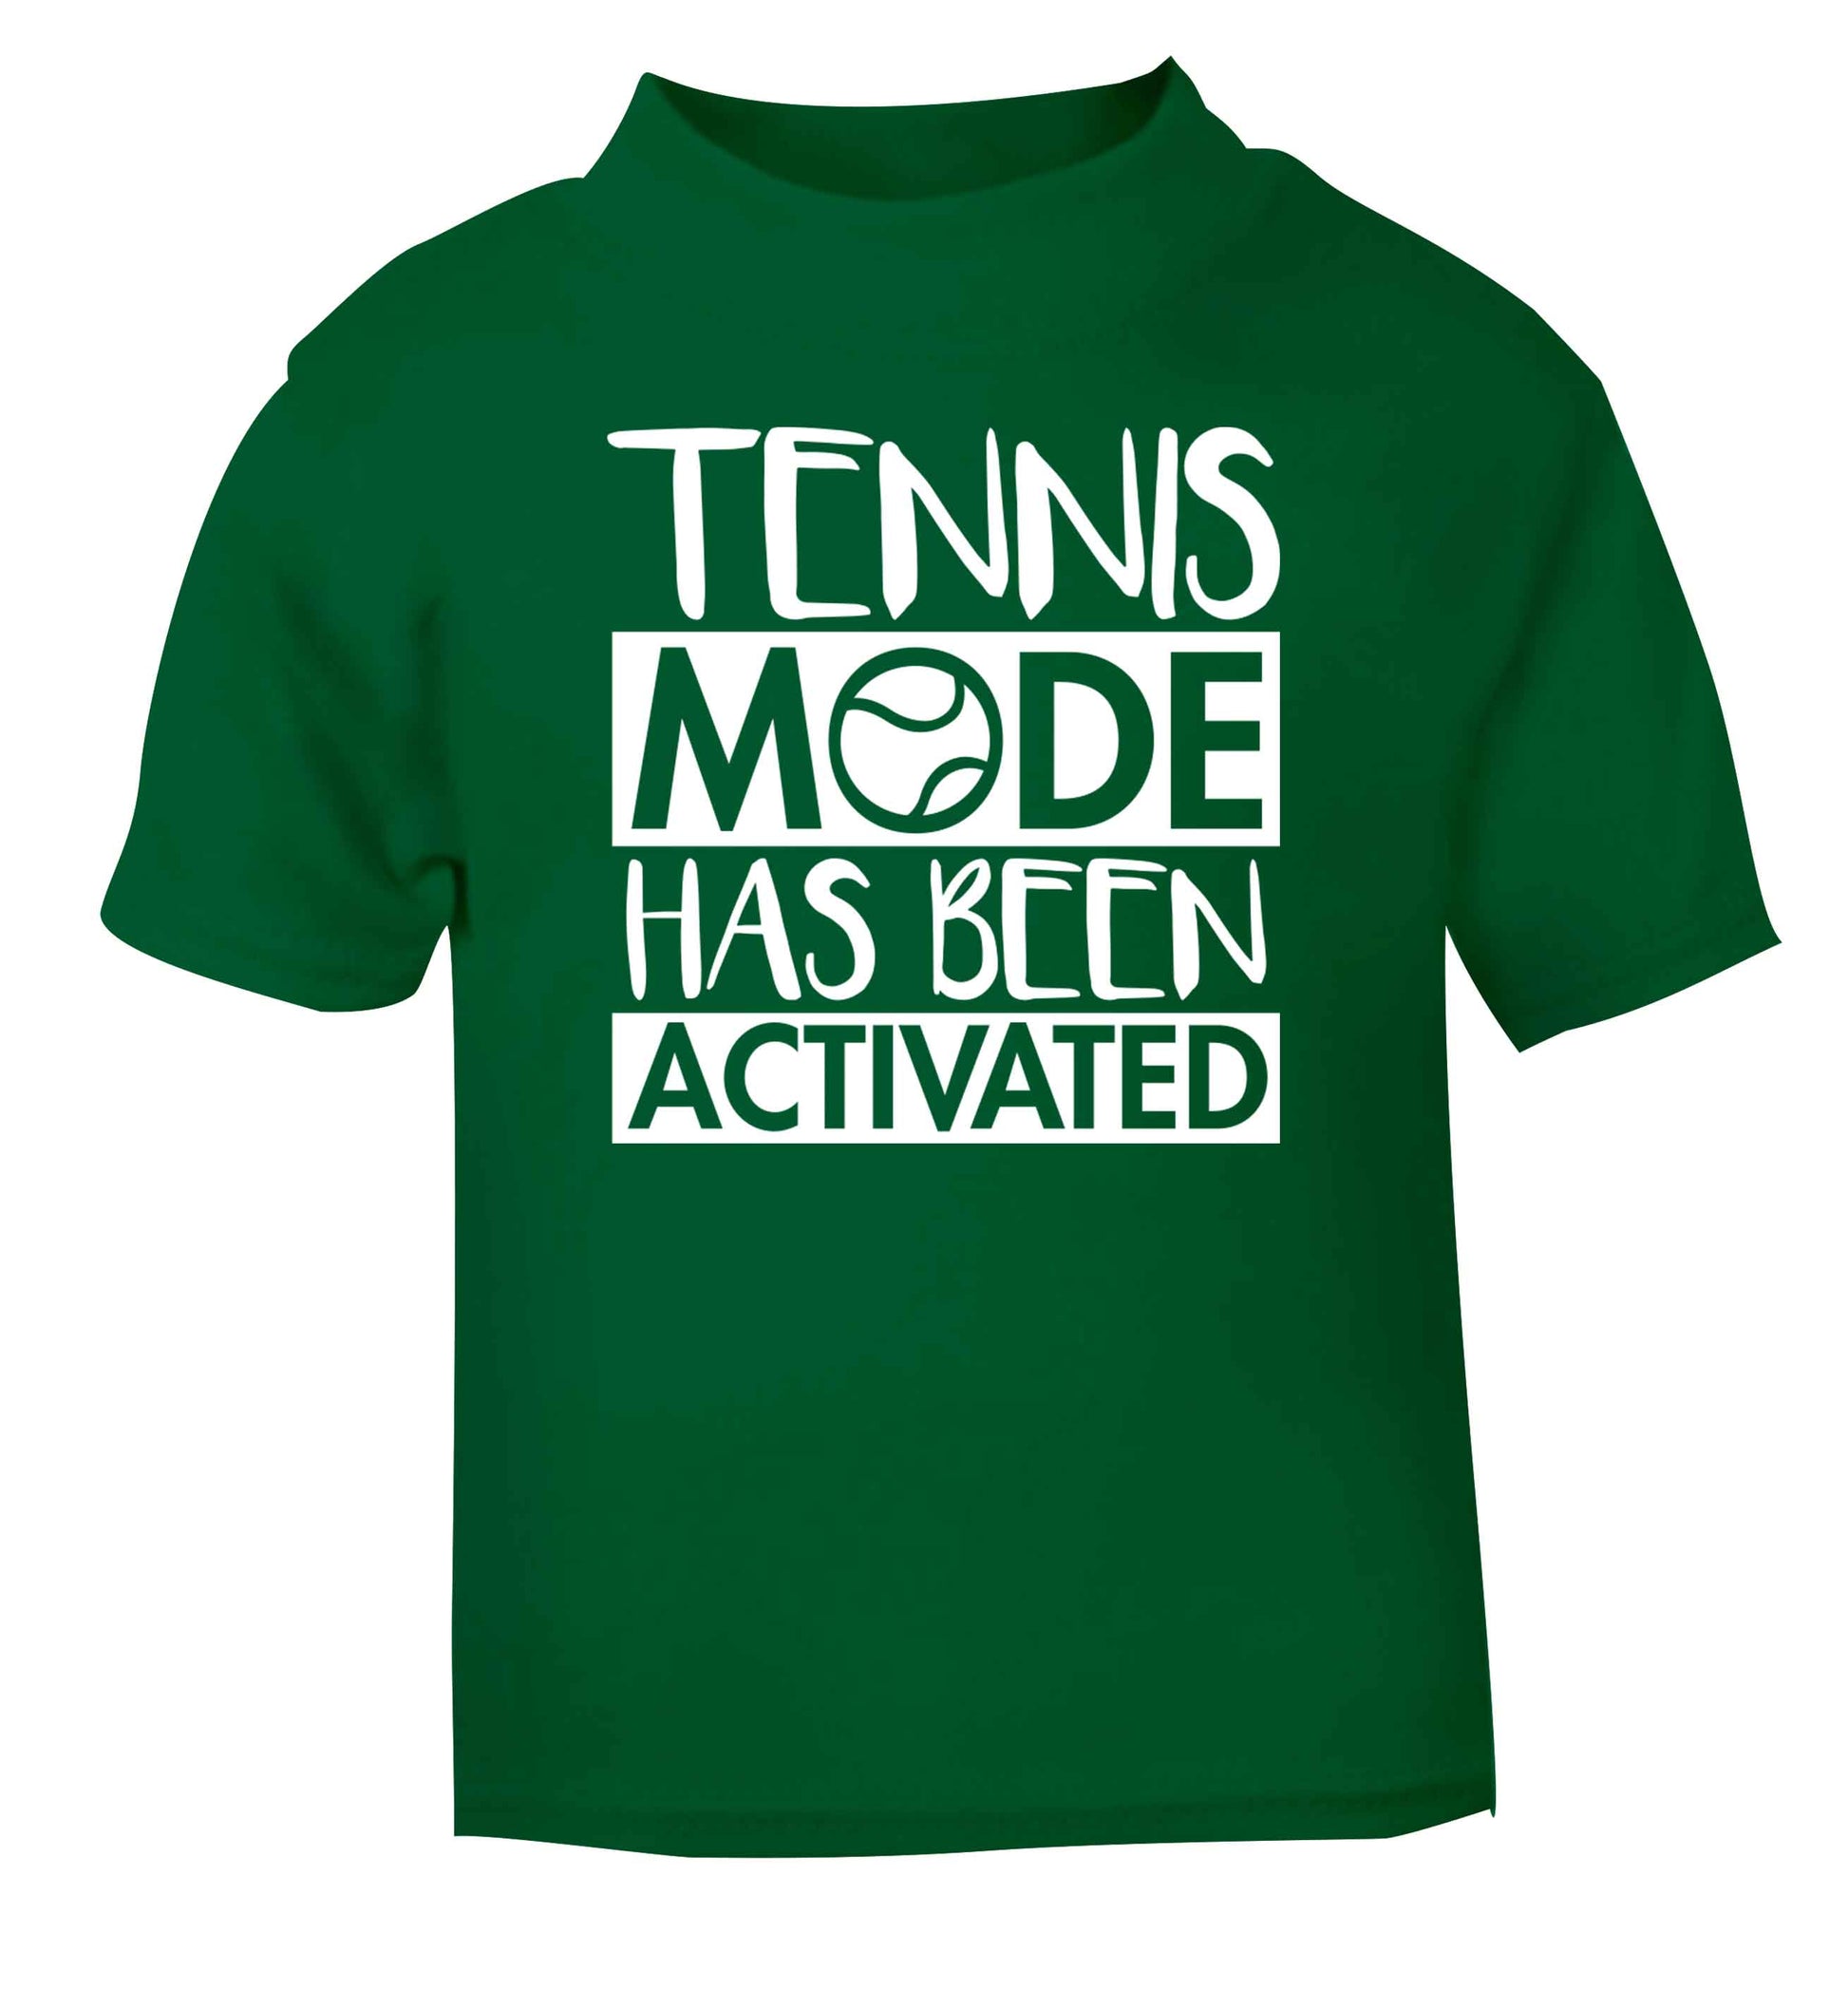 Tennis mode has been activated green Baby Toddler Tshirt 2 Years